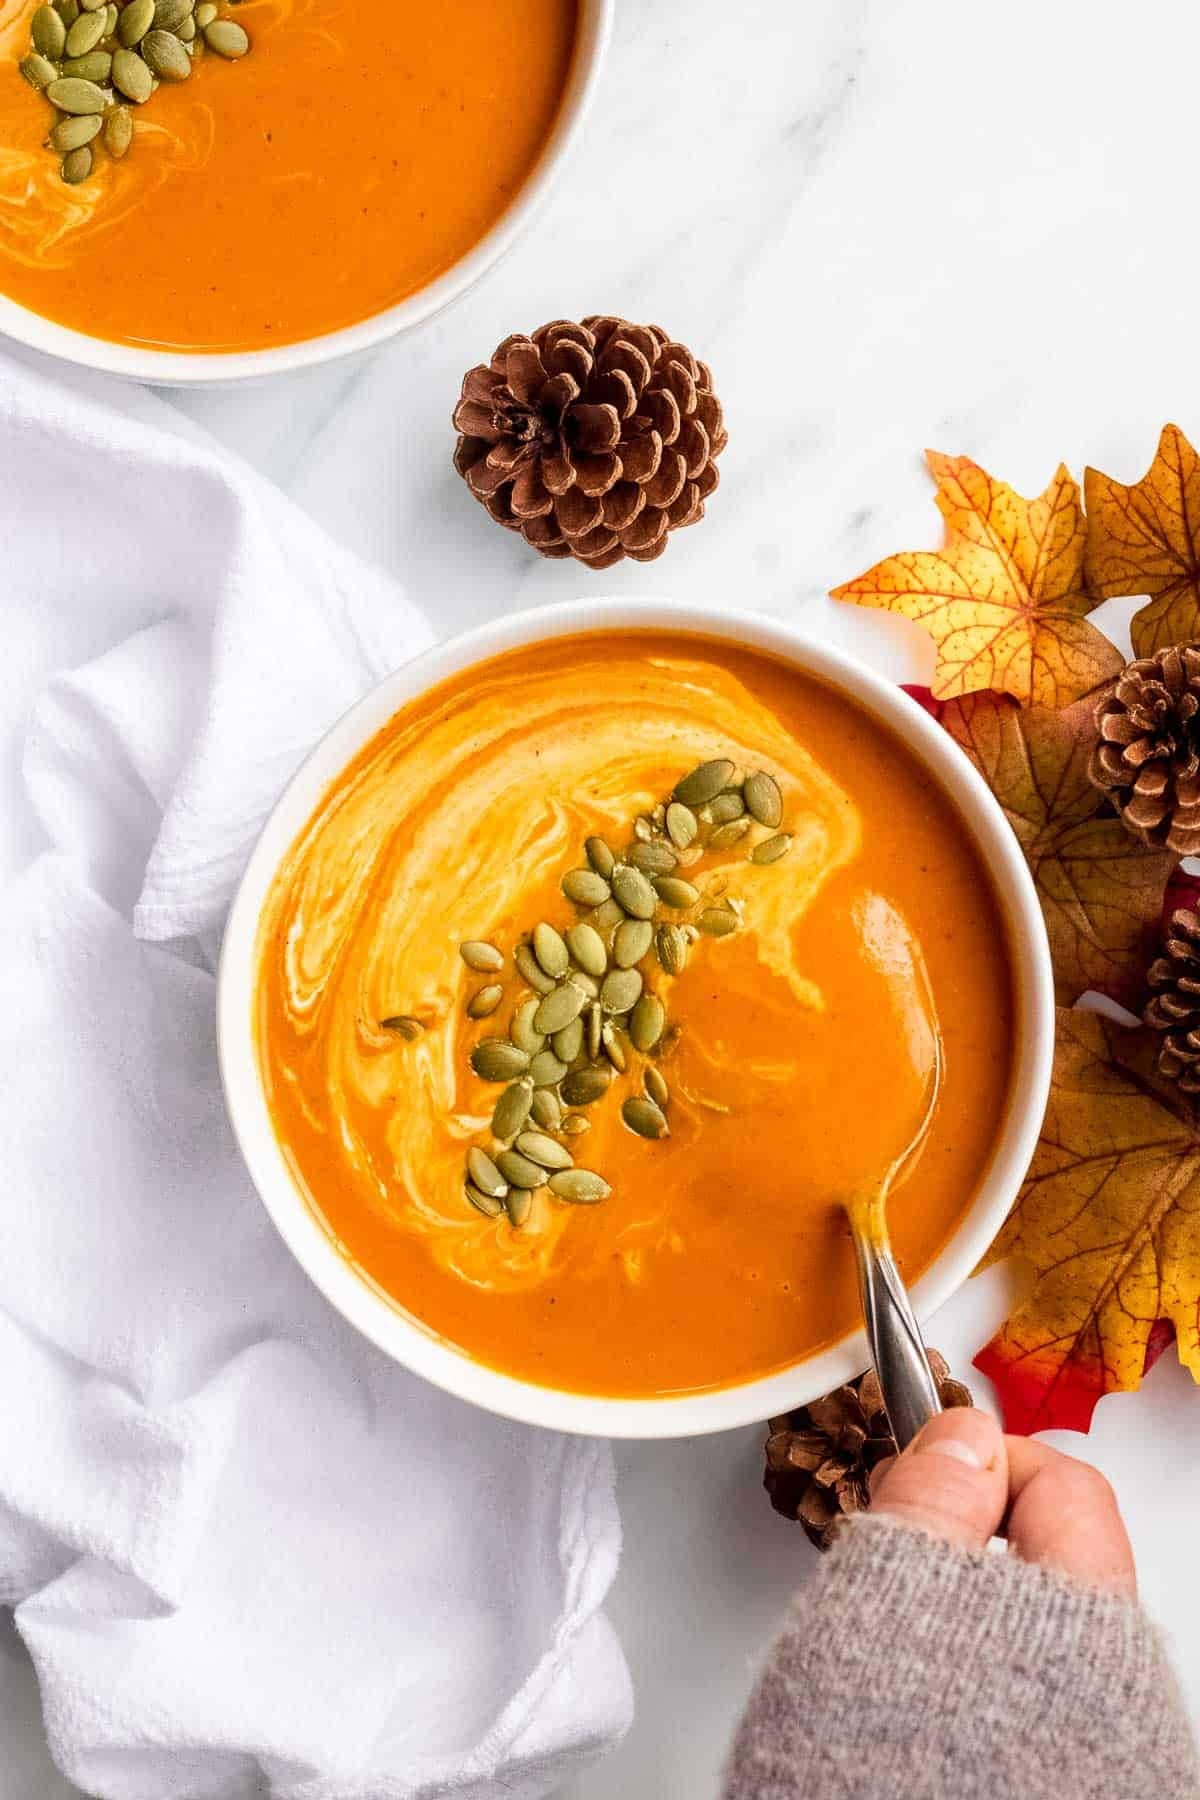 Creamy pumpkin curry soup with pumpkin seeds in a bowl with a hand about to take a spoonful- top view